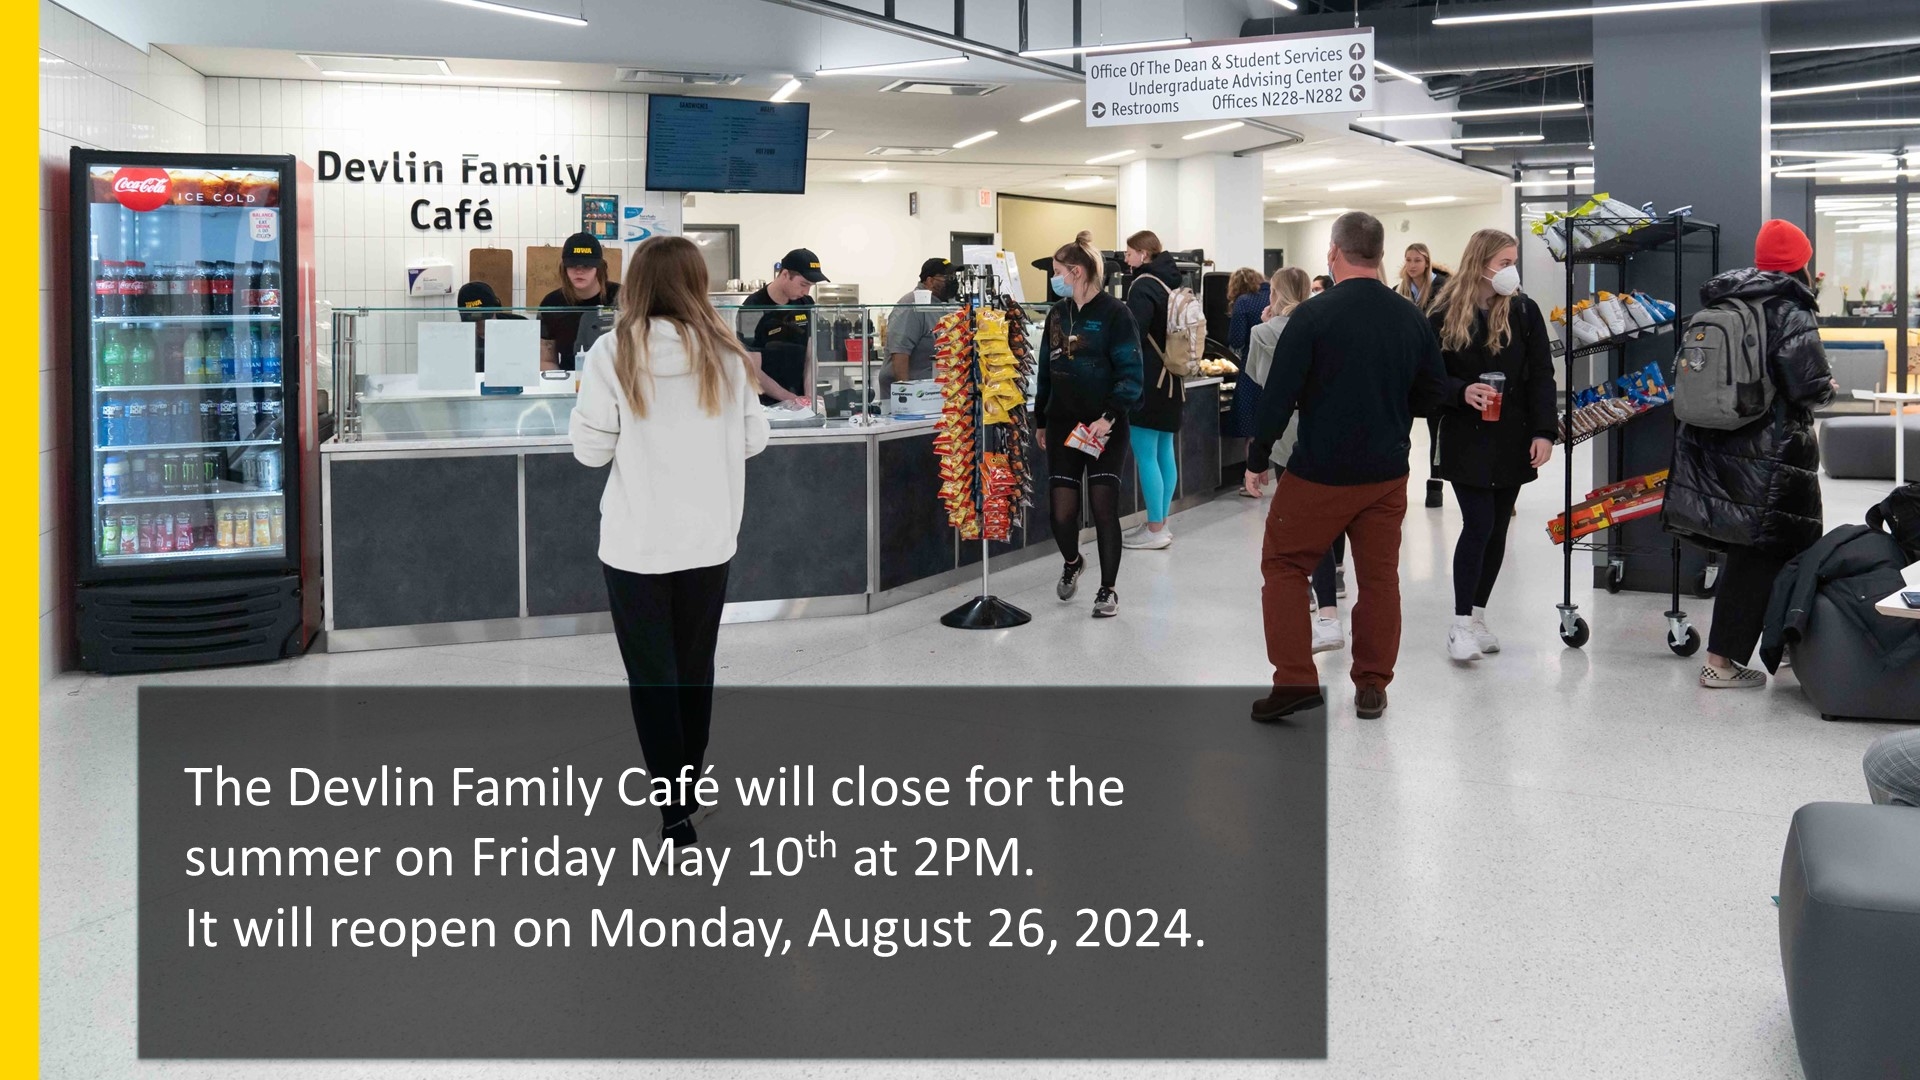 The Devlin Family Café will close for the summer on Friday May 10th at 2PM. It will reopen on Monday, August 26, 2024.